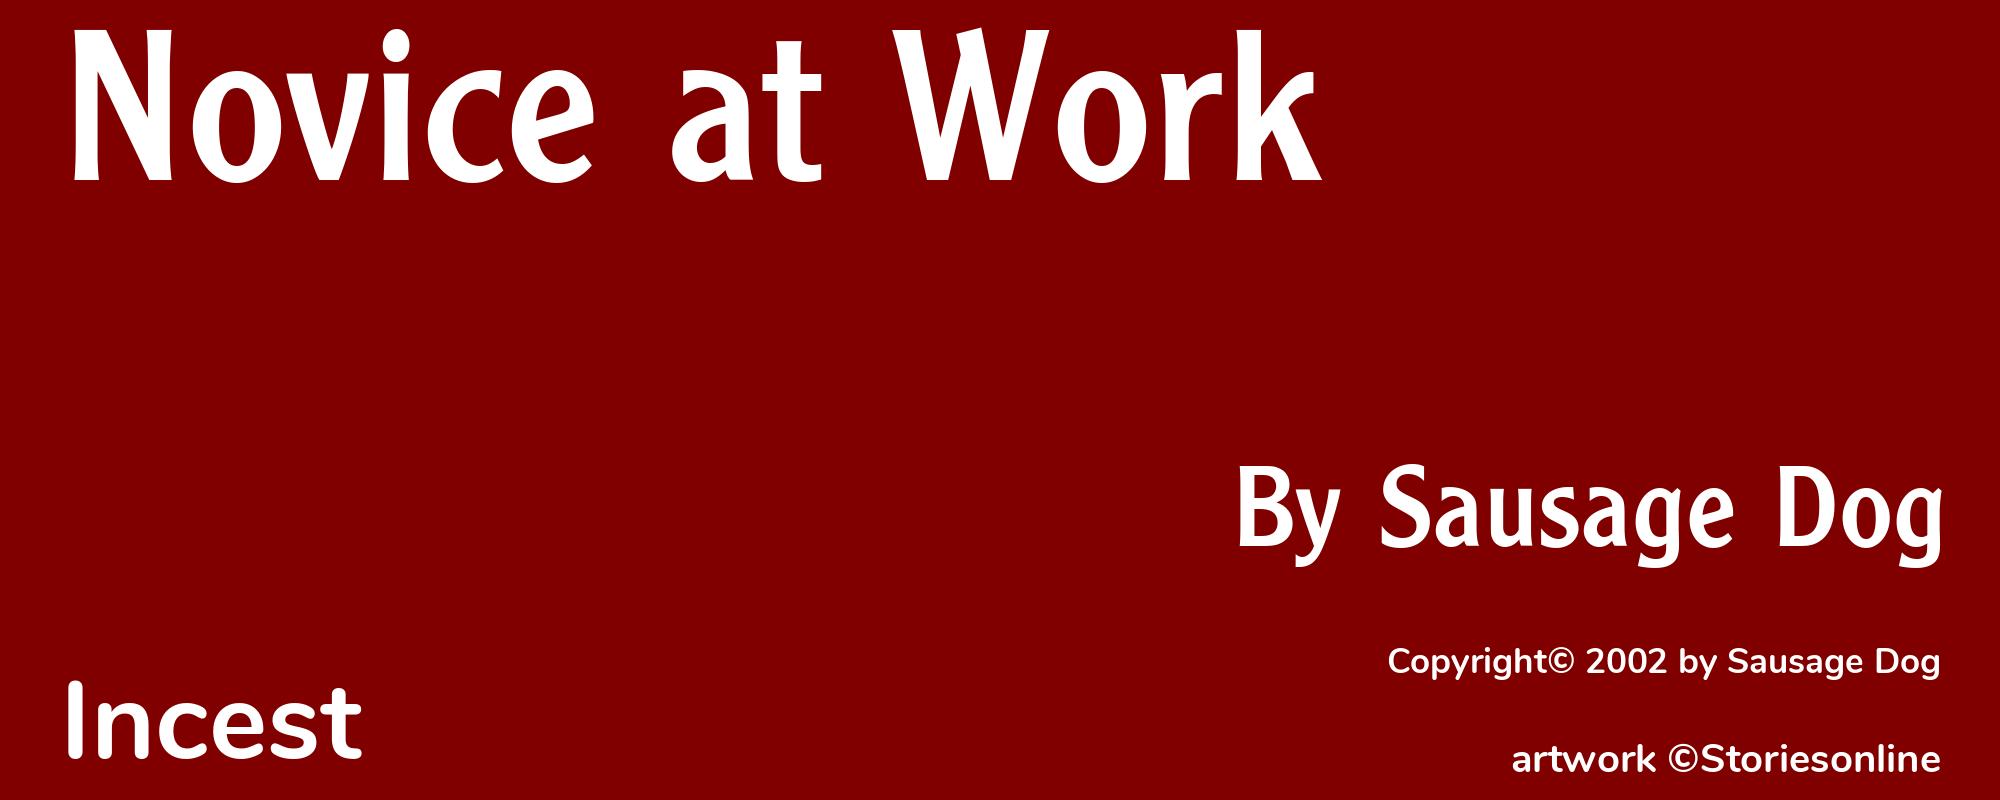 Novice at Work - Cover